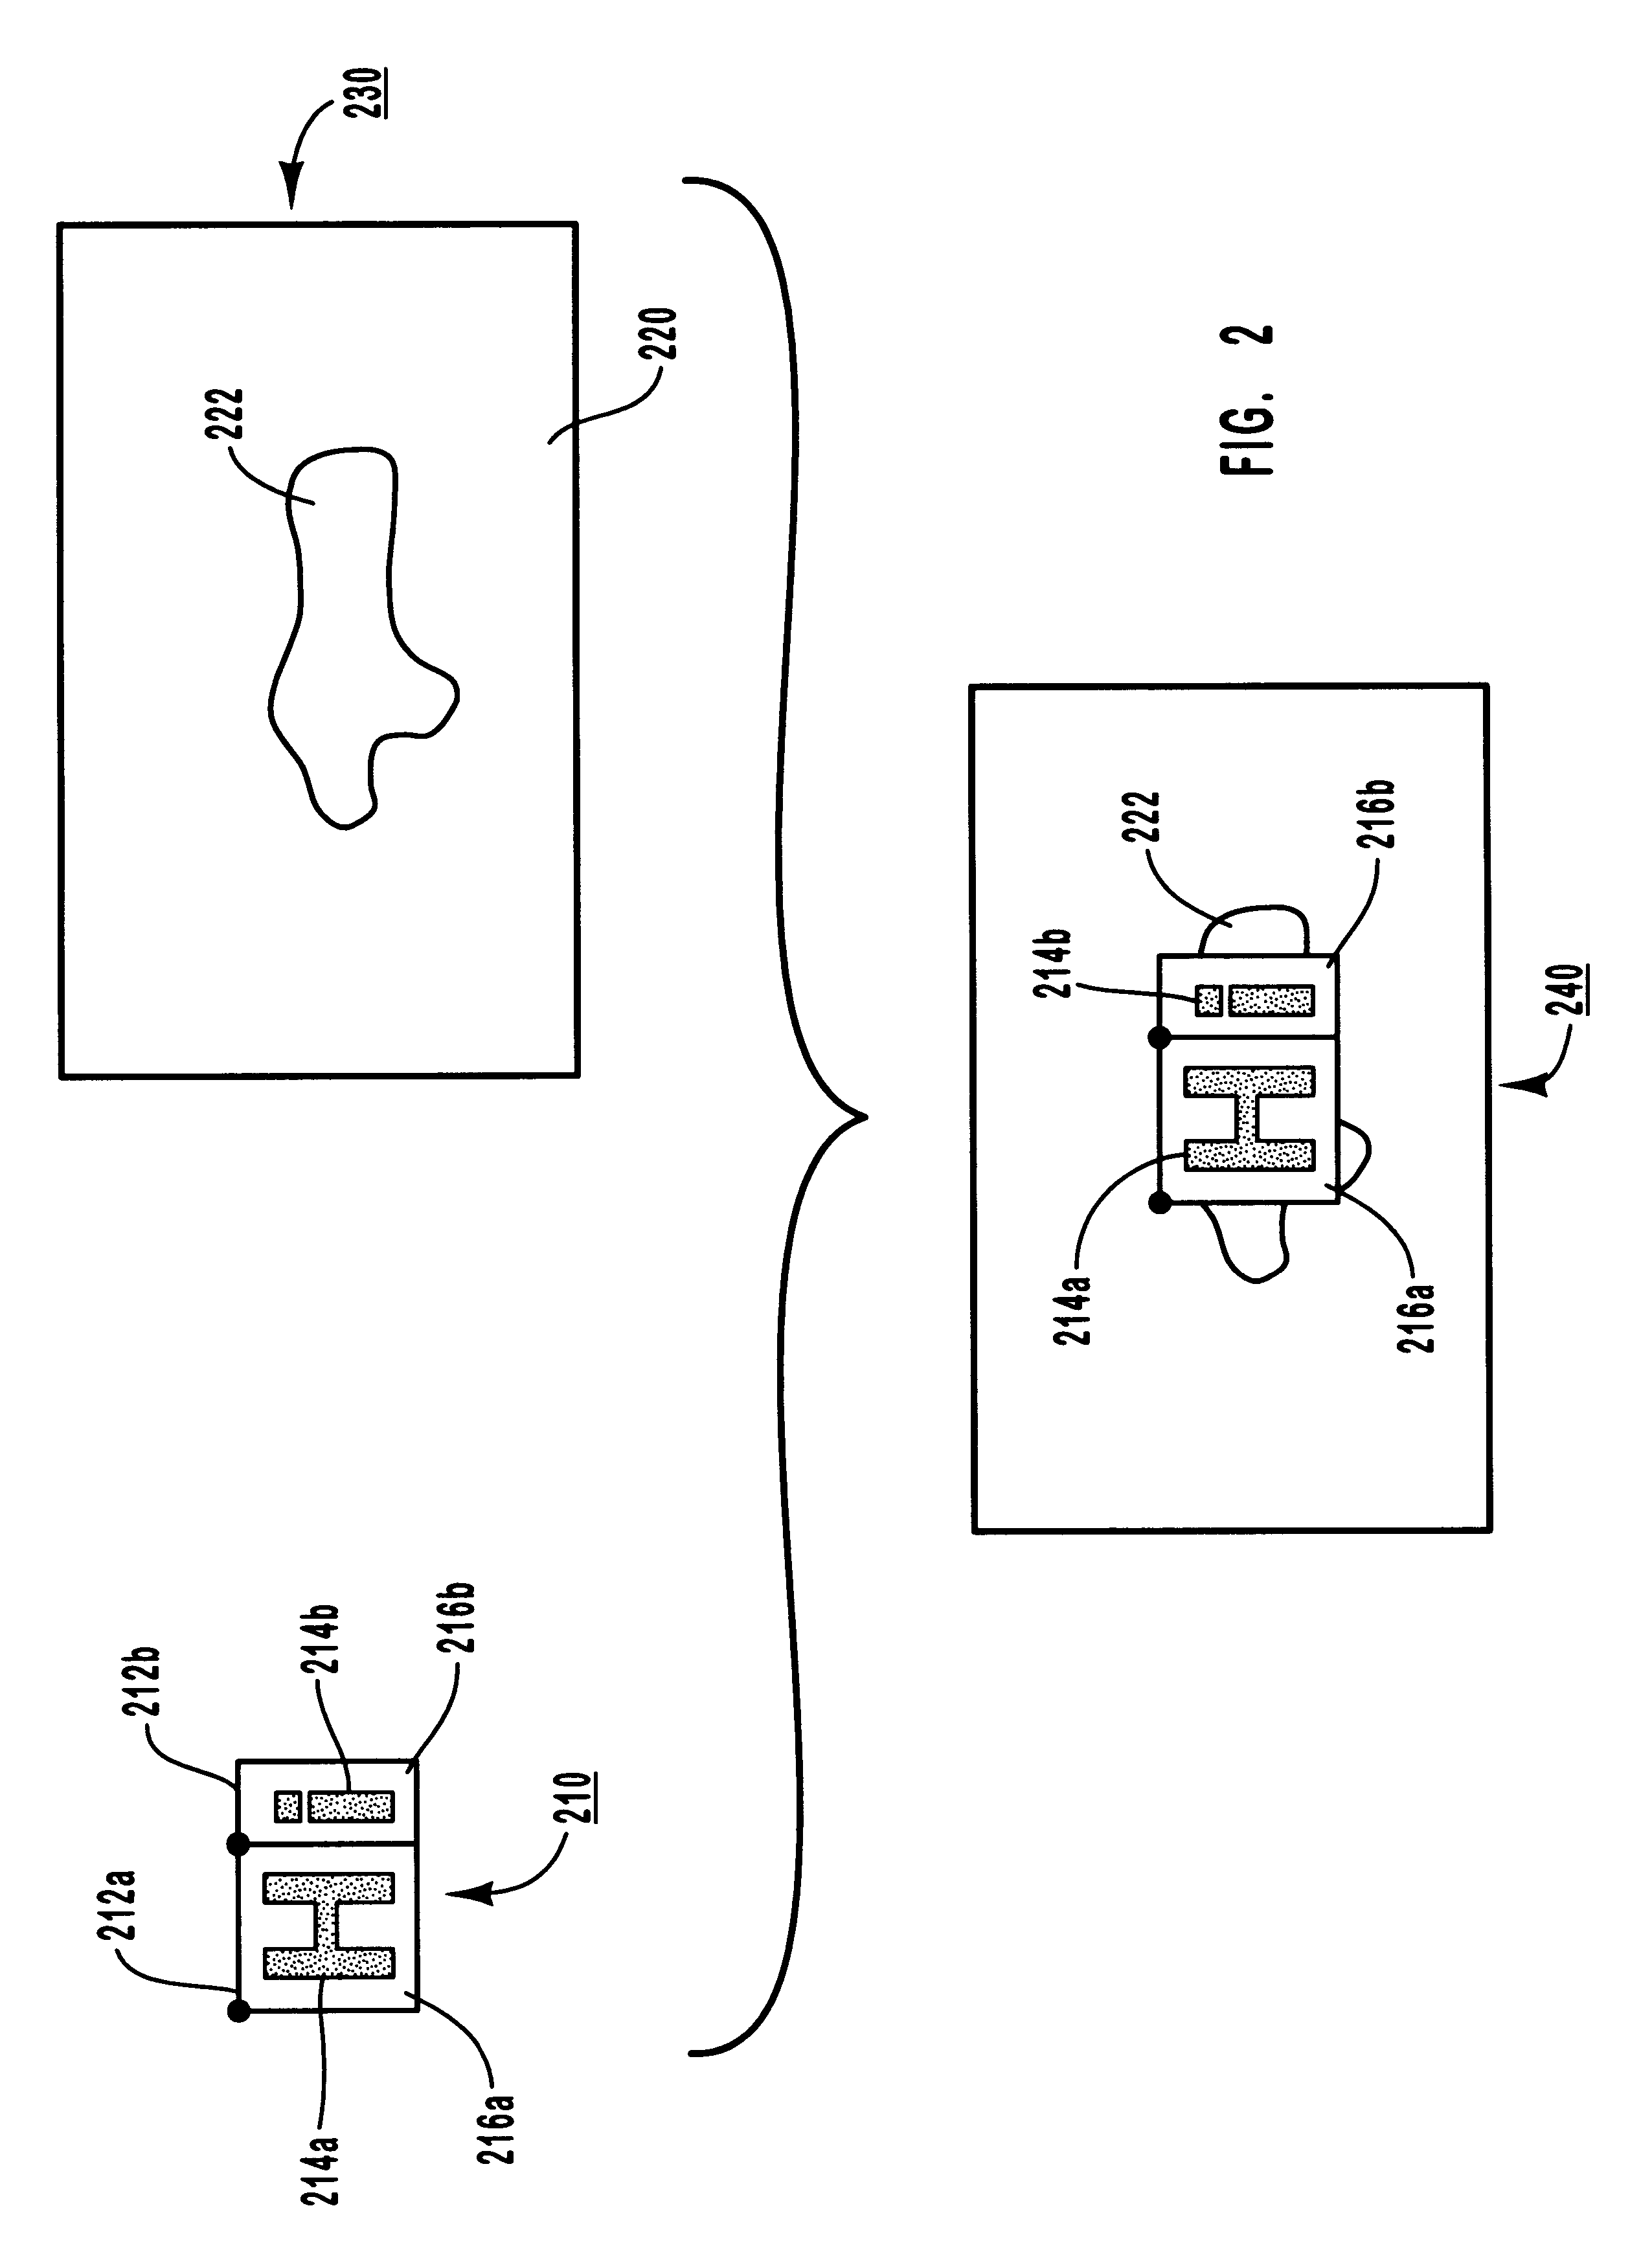 Methods and apparatus for improving read/modify/write operations